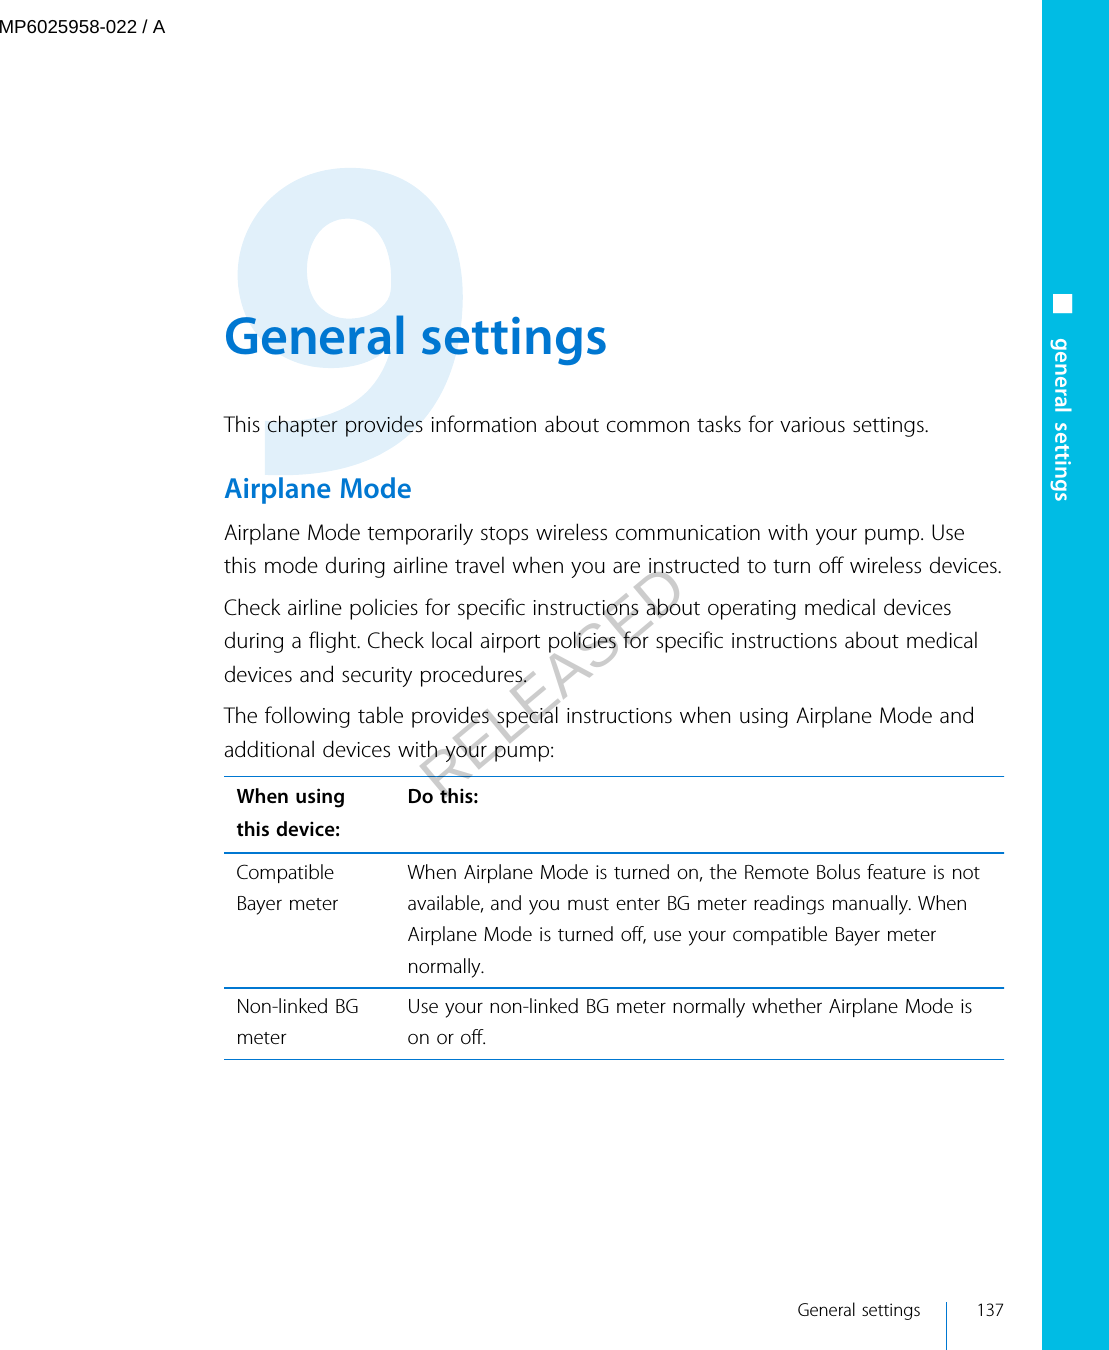  General settingsThis chapter provides information about common tasks for various settings.Airplane ModeAirplane Mode temporarily stops wireless communication with your pump. Usethis mode during airline travel when you are instructed to turn off wireless devices.Check airline policies for specific instructions about operating medical devicesduring a flight. Check local airport policies for specific instructions about medicaldevices and security procedures.The following table provides special instructions when using Airplane Mode andadditional devices with your pump:When usingthis device:Do this:CompatibleBayer meterWhen Airplane Mode is turned on, the Remote Bolus feature is notavailable, and you must enter BG meter readings manually. WhenAirplane Mode is turned off, use your compatible Bayer meternormally.Non-linked BGmeterUse your non-linked BG meter normally whether Airplane Mode ison or off. General settings 137■ general settingsMP6025958-022 / ARELEASED